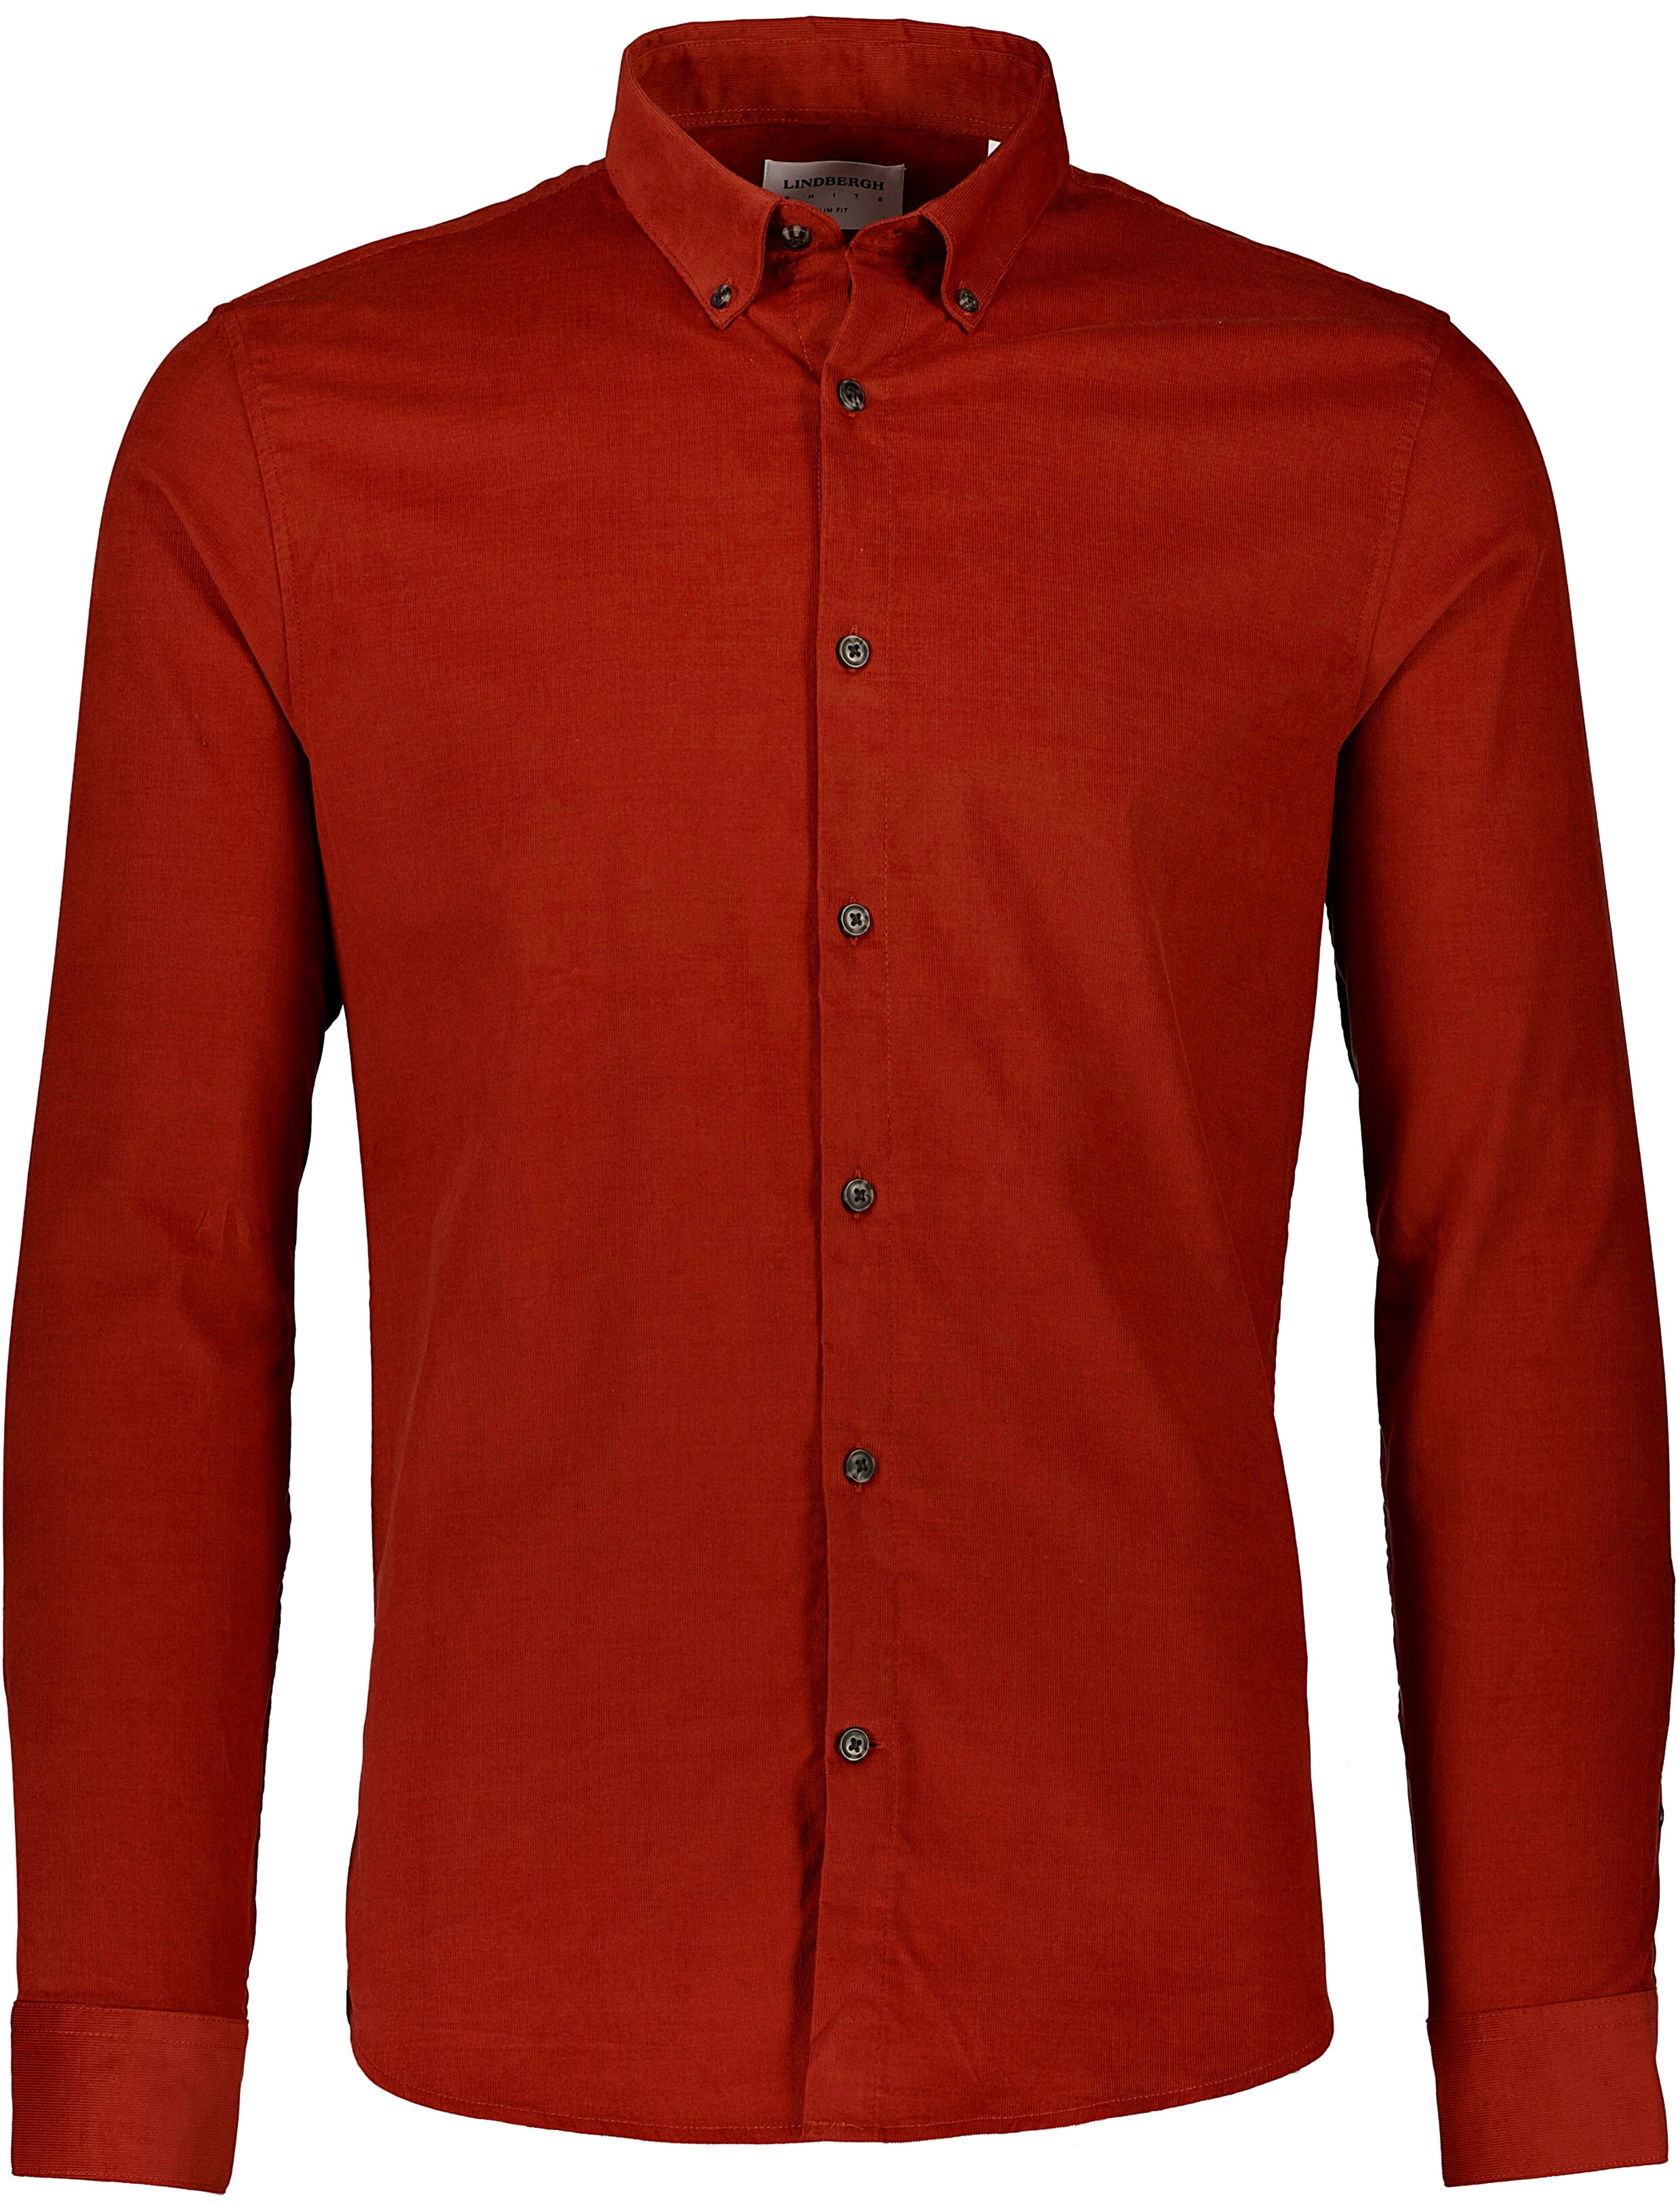 Business casual shirt | Slim fit 30-203248